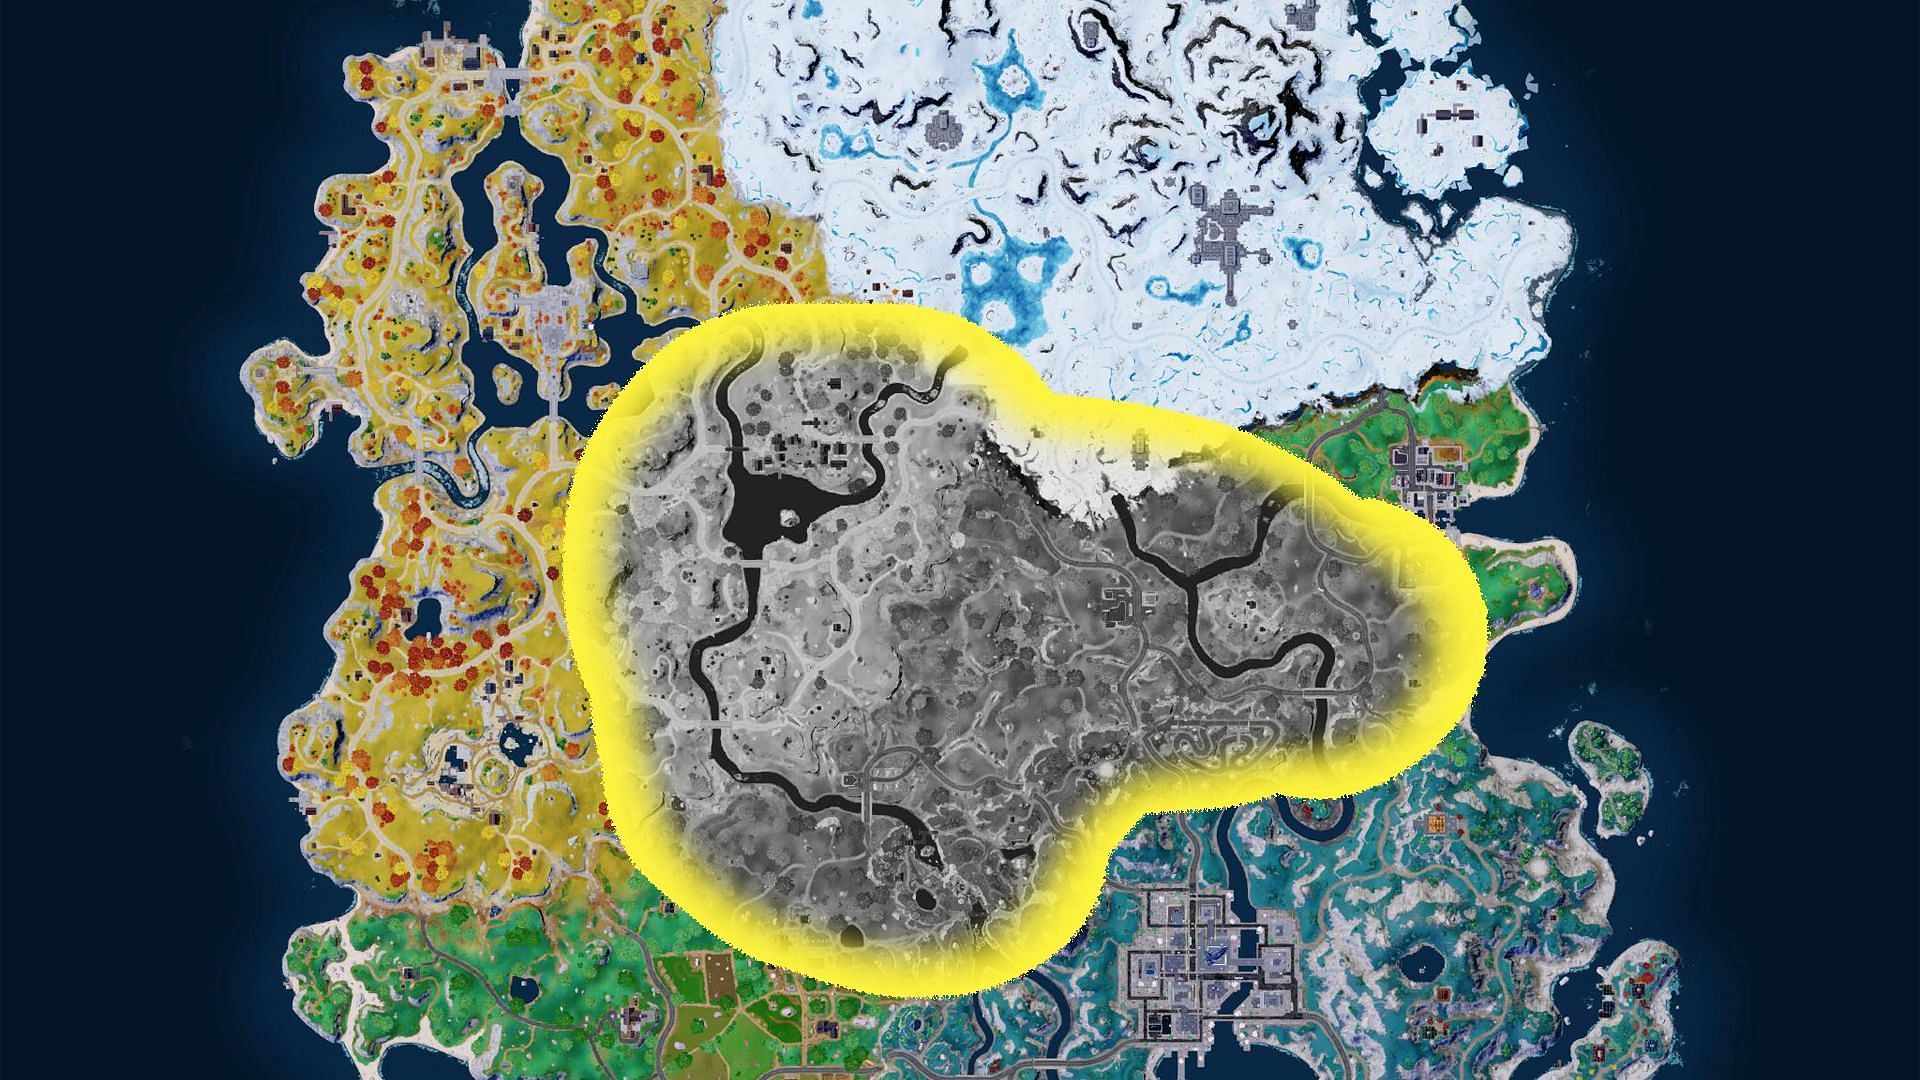 The highlighted area shows a likely location of the upcoming Fortnite biome (Image via Sportskeeda)